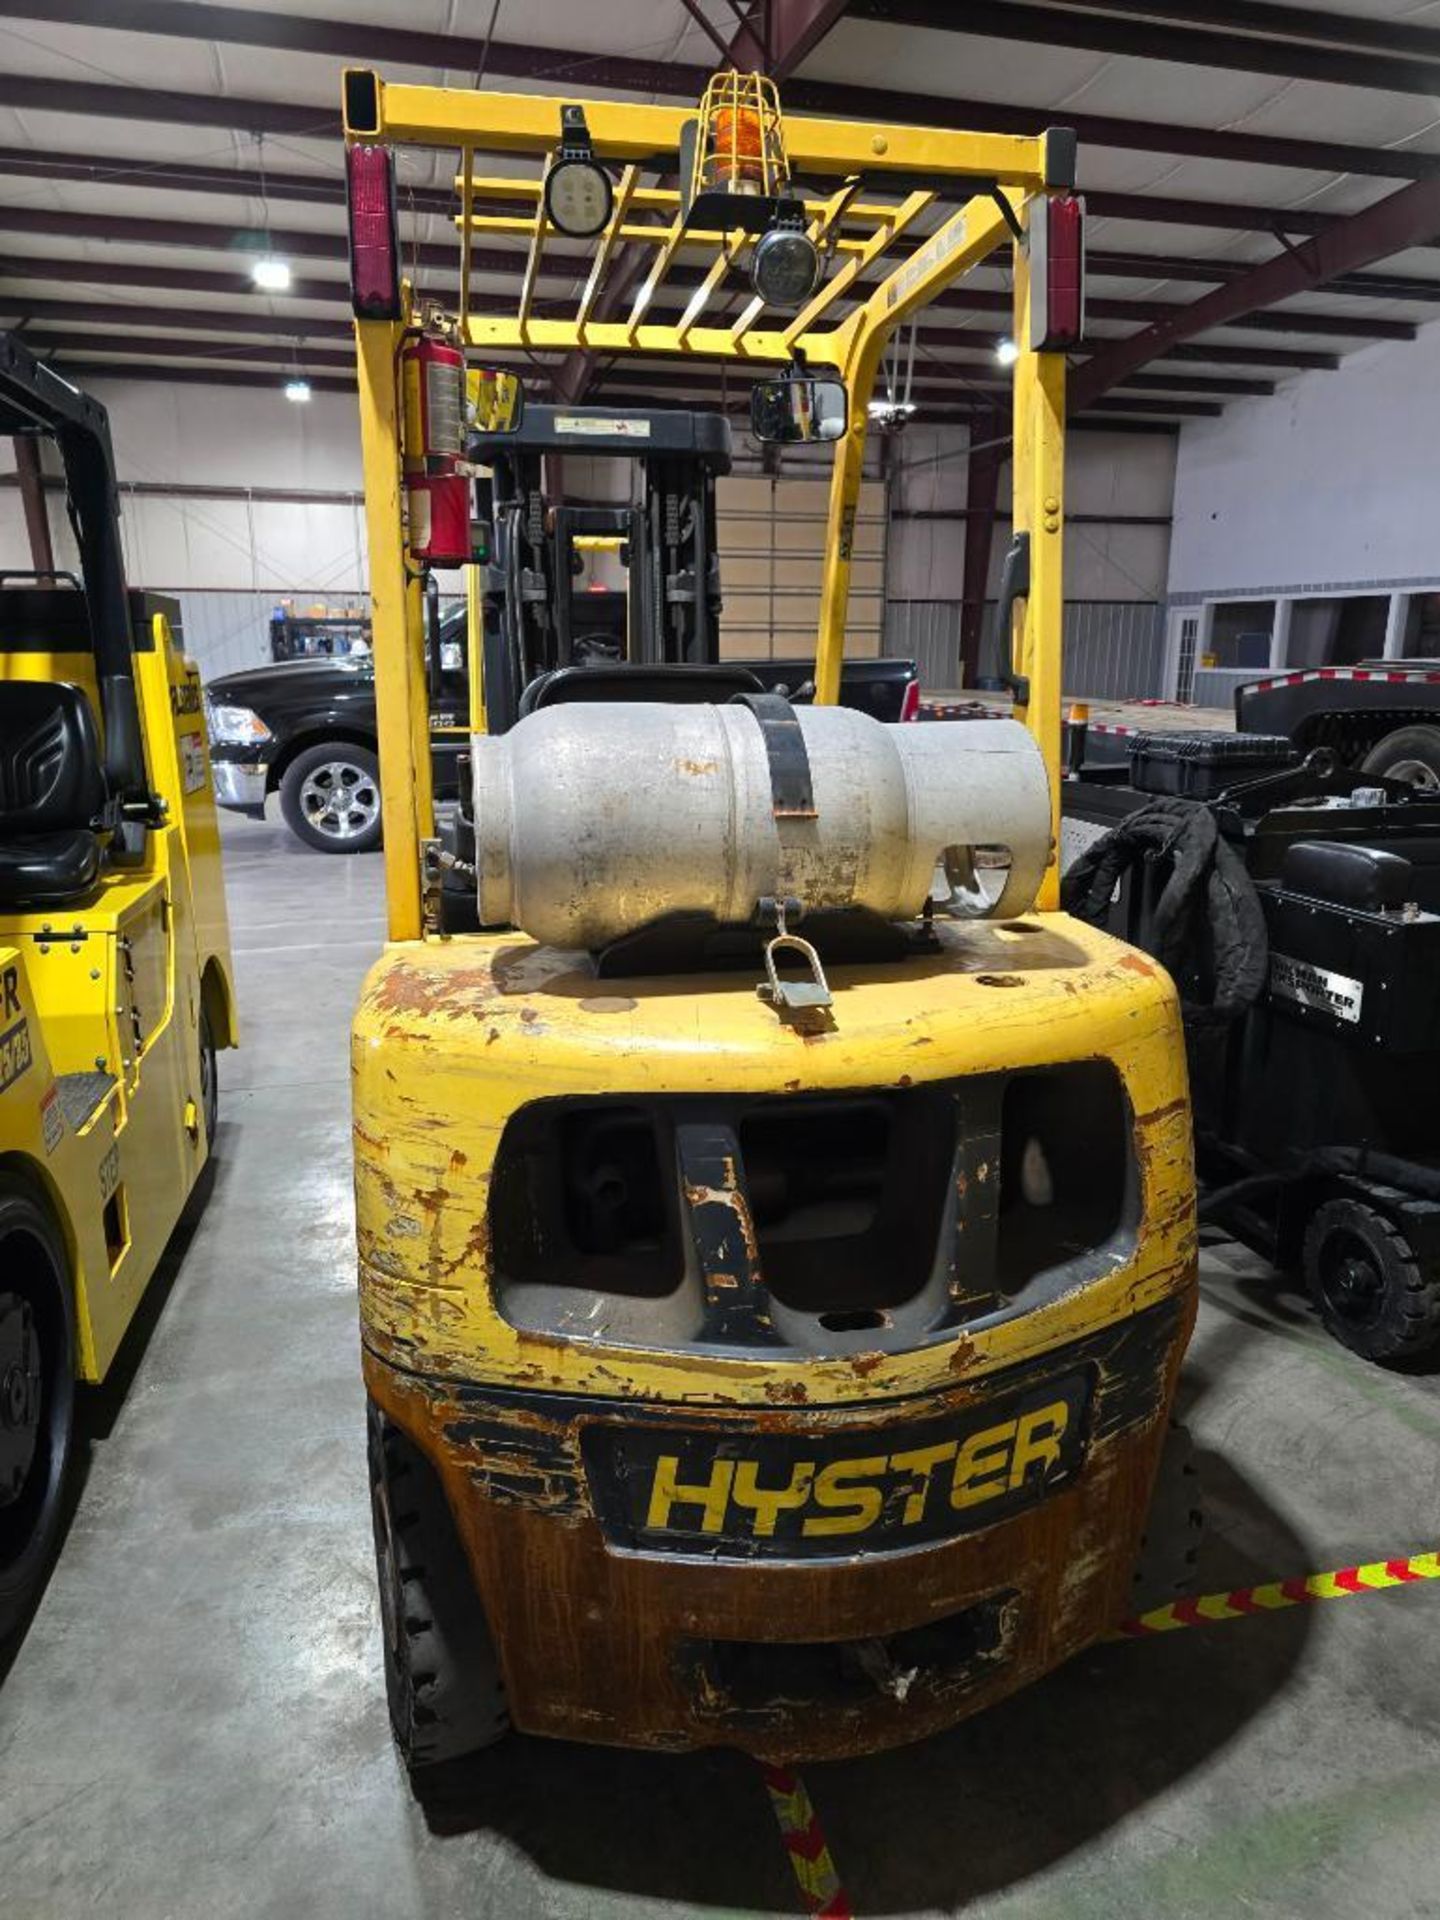 2018 Hyster H50XT 5,000 LB. Forklift, S/N A380V06798S, 195" Lift Height, Solid Cushion Tires, Sidesh - Image 9 of 13